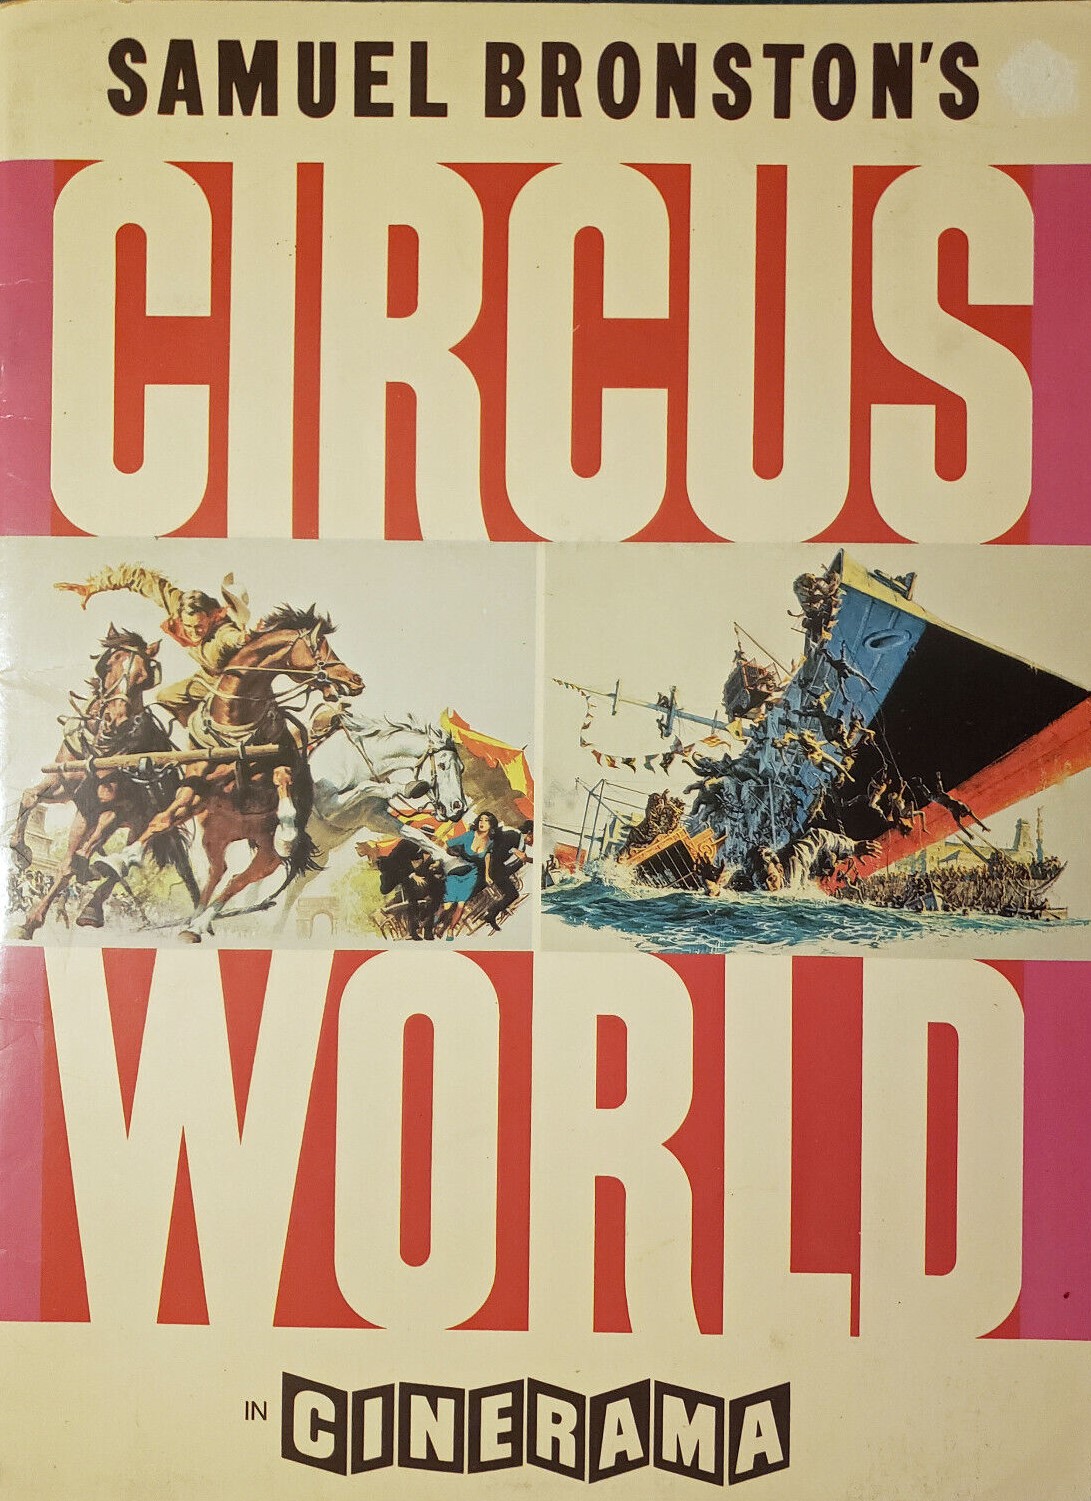 Take Two: Behind the Scenes: “Circus World/The Magnificent Showman” (1964)